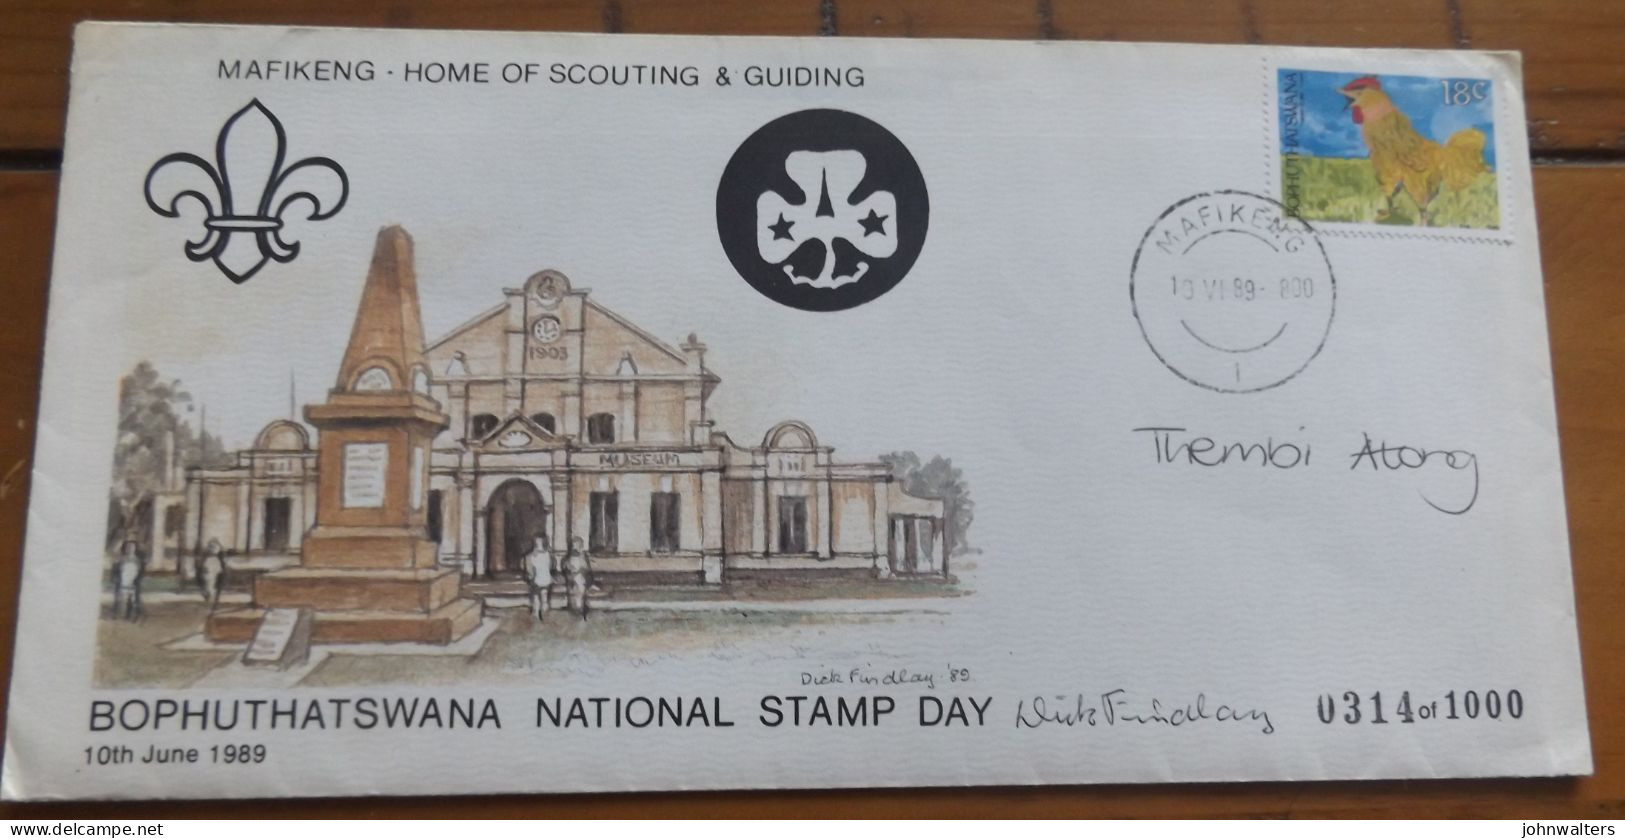 Bophuthatswana Nation Stamp Day Ltd Ed Cover Signed By Designer & Thembi Atong Mafikeng Home Of Scouting & Guiding - Bophuthatswana